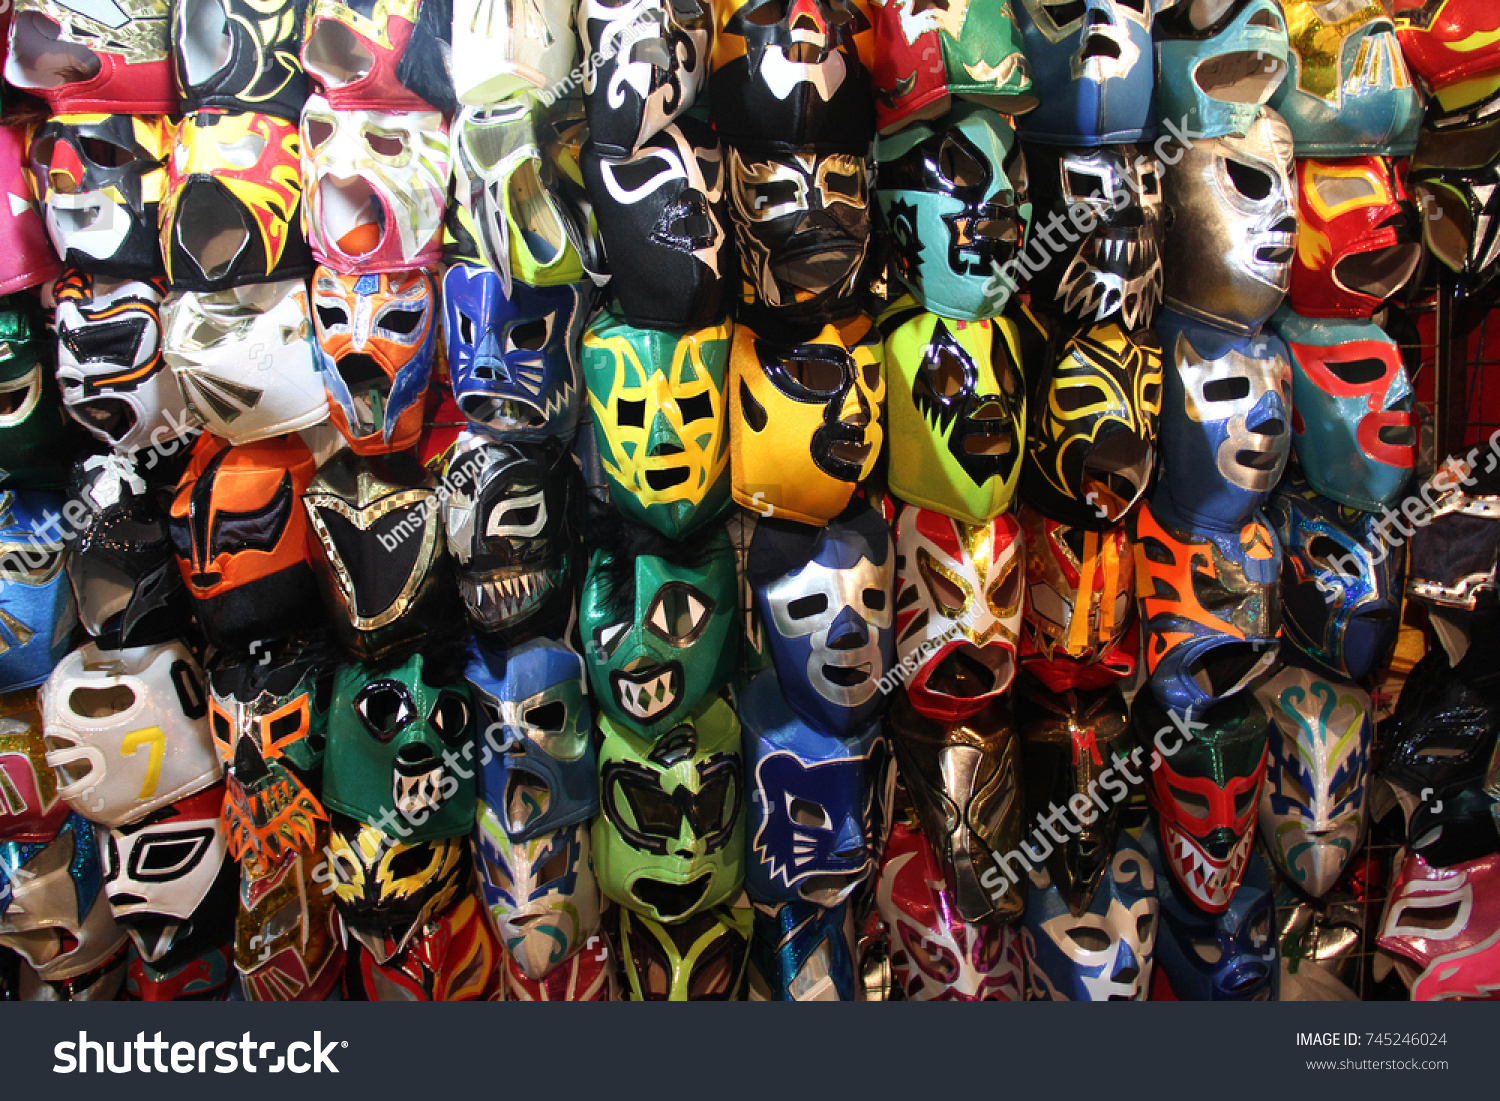 A selection of colorful "Lucha Libre" Mexican professional wrestling masks, for sale outside of Arena Mexico, Mexico City #745246024